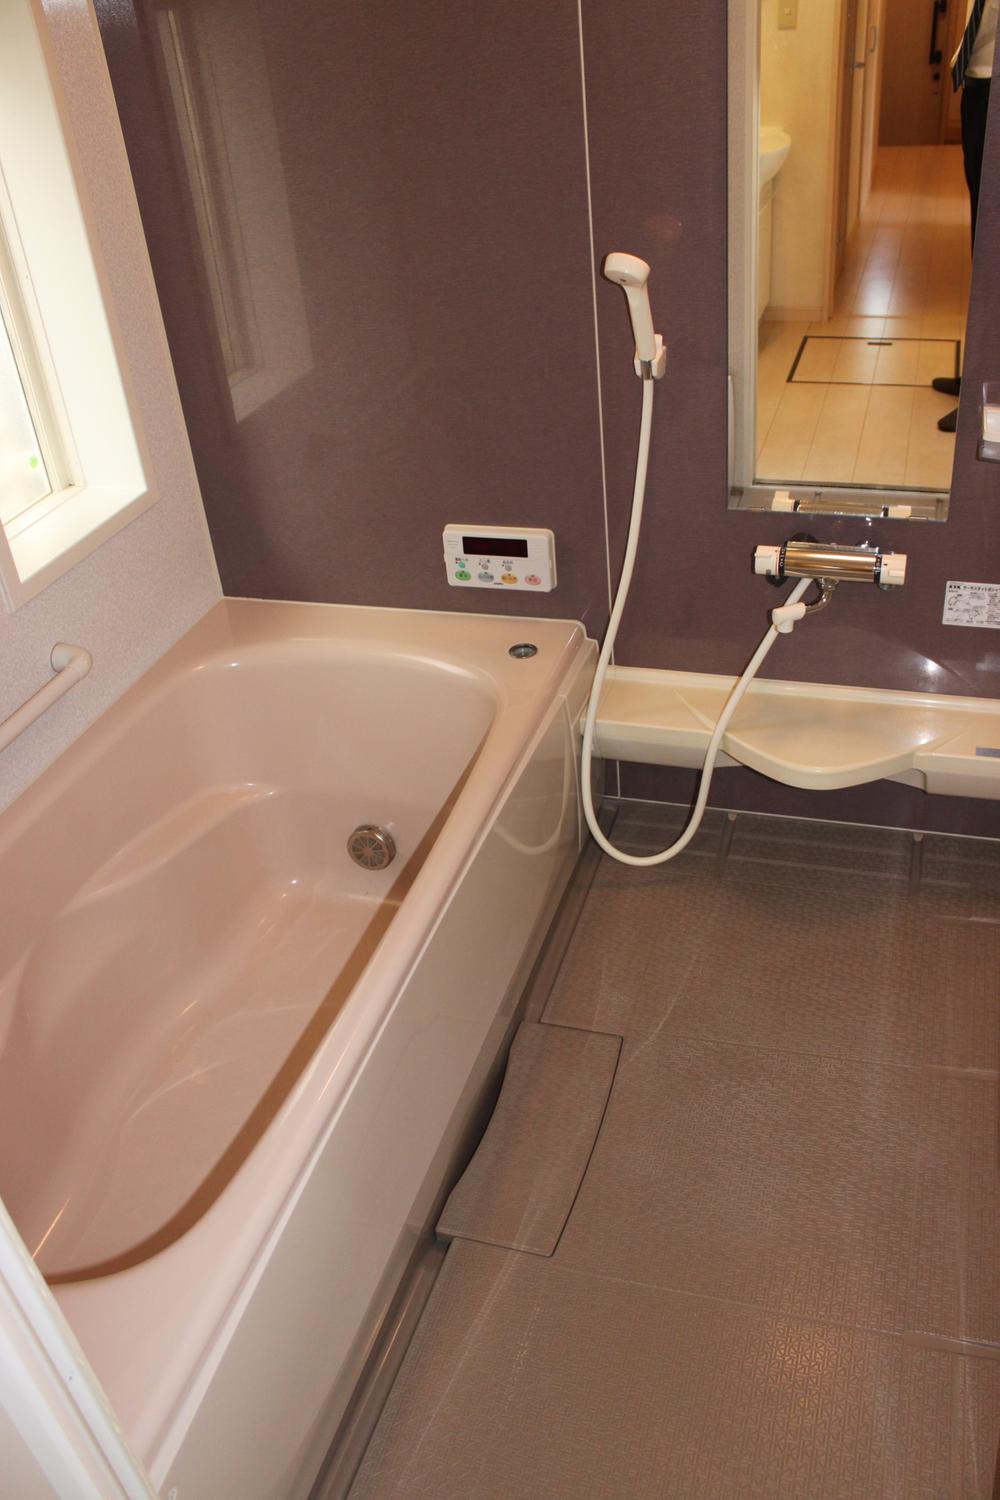 Bathroom. It is a shallow low-floor type of crossing